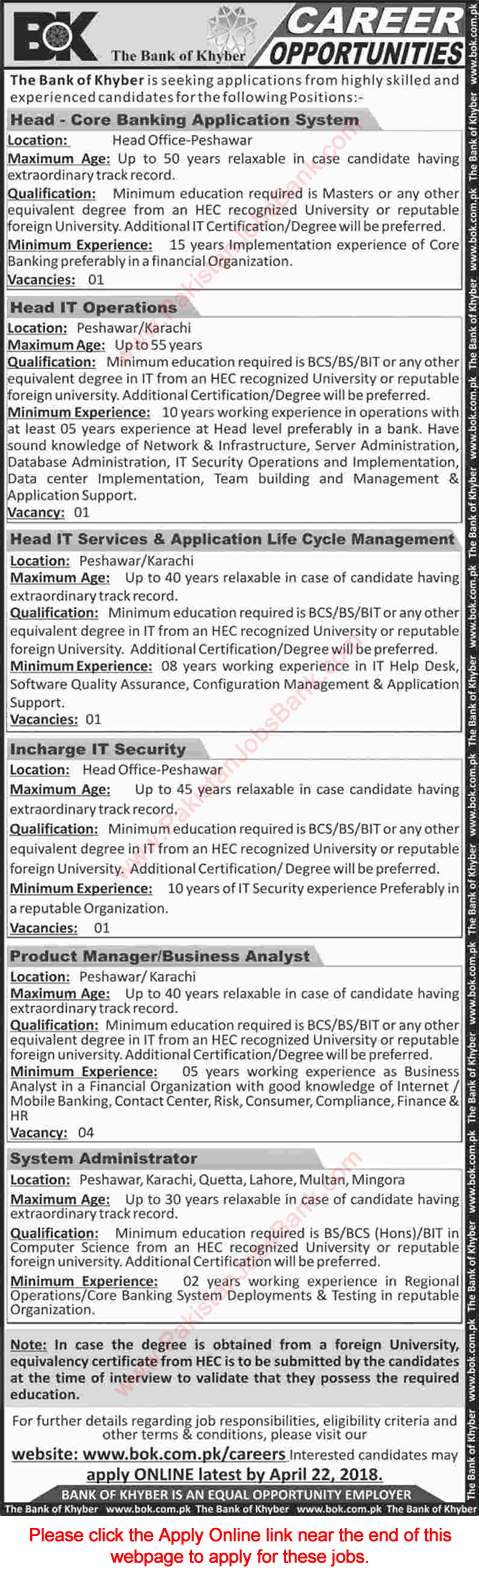 Bank of Khyber Jobs April 2018 Apply Online Product Manager / Business Analyst, System Administrator & Others Latest